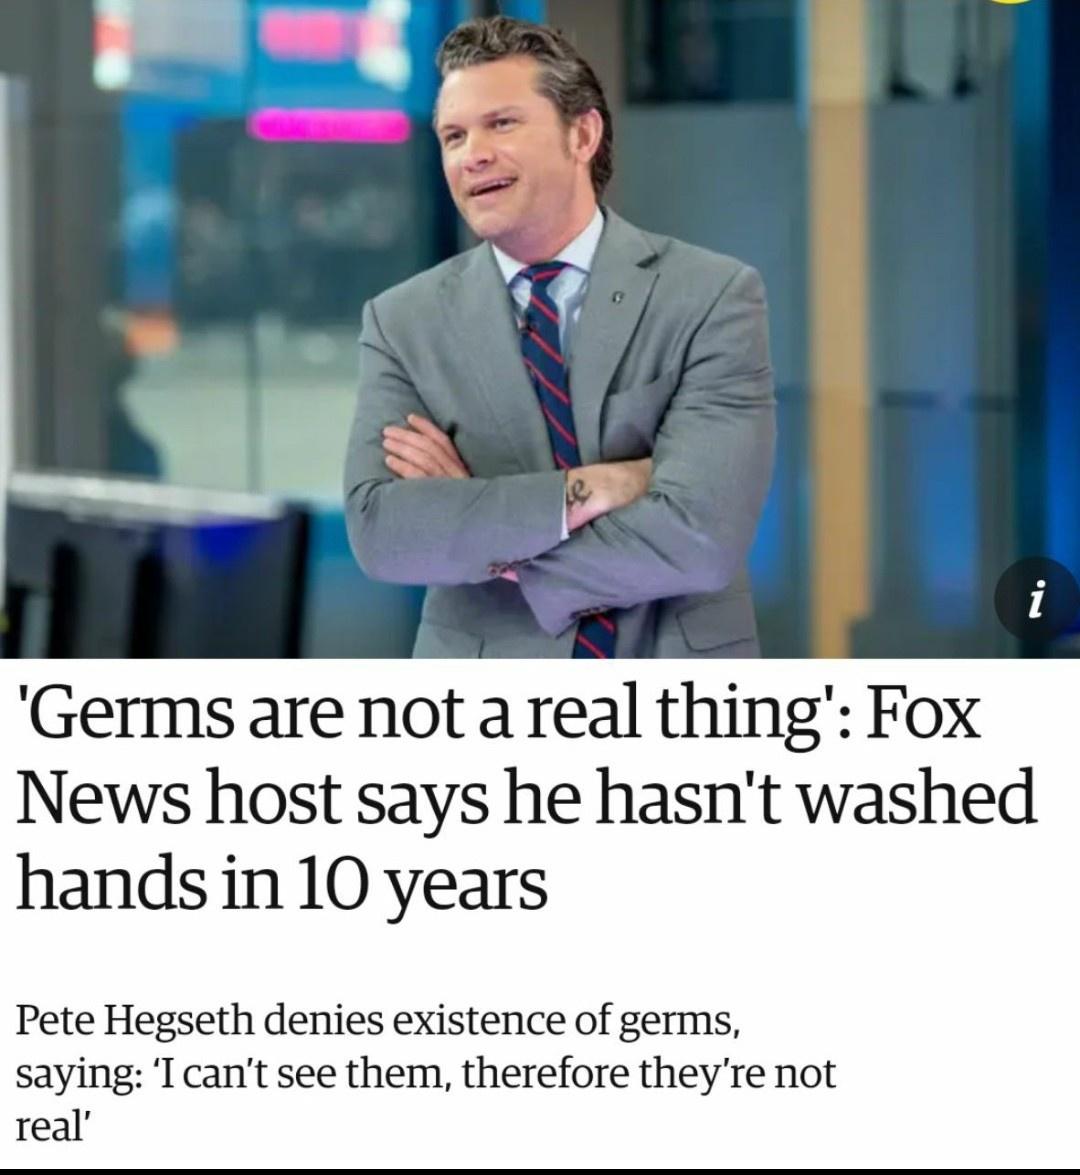 dnd poison memes - i 'Germs are not a real thing' Fox News host says he hasn't washed hands in 10 years Pete Hegseth denies existence of germs, saying 'I can't see them, therefore they're not real'